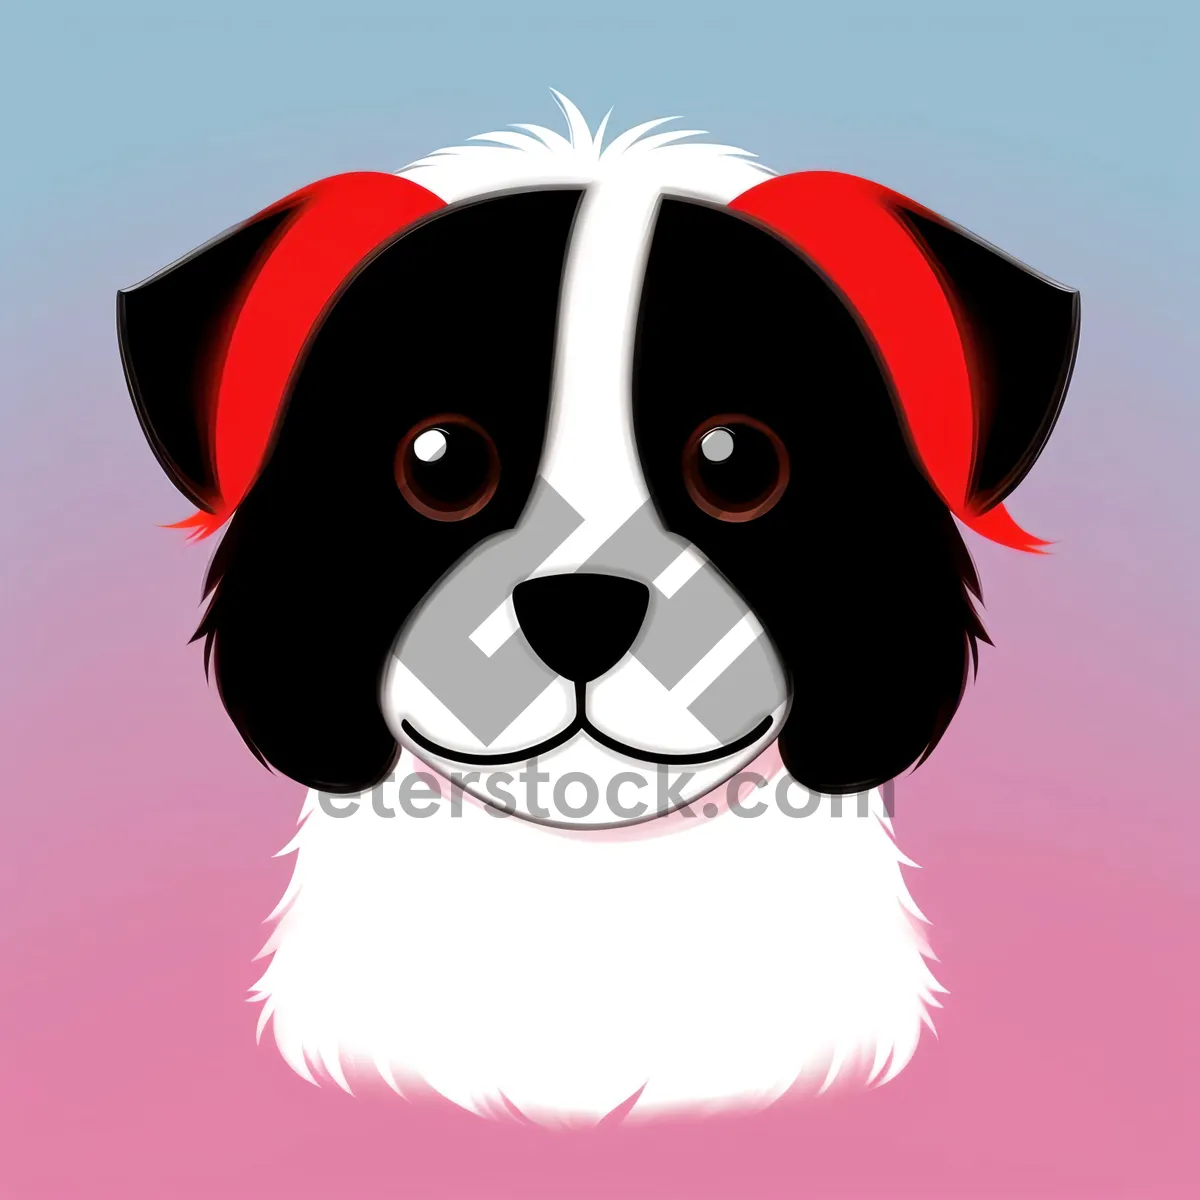 Picture of Cute Cartoon Character with Animal Ears - Clip Art Image